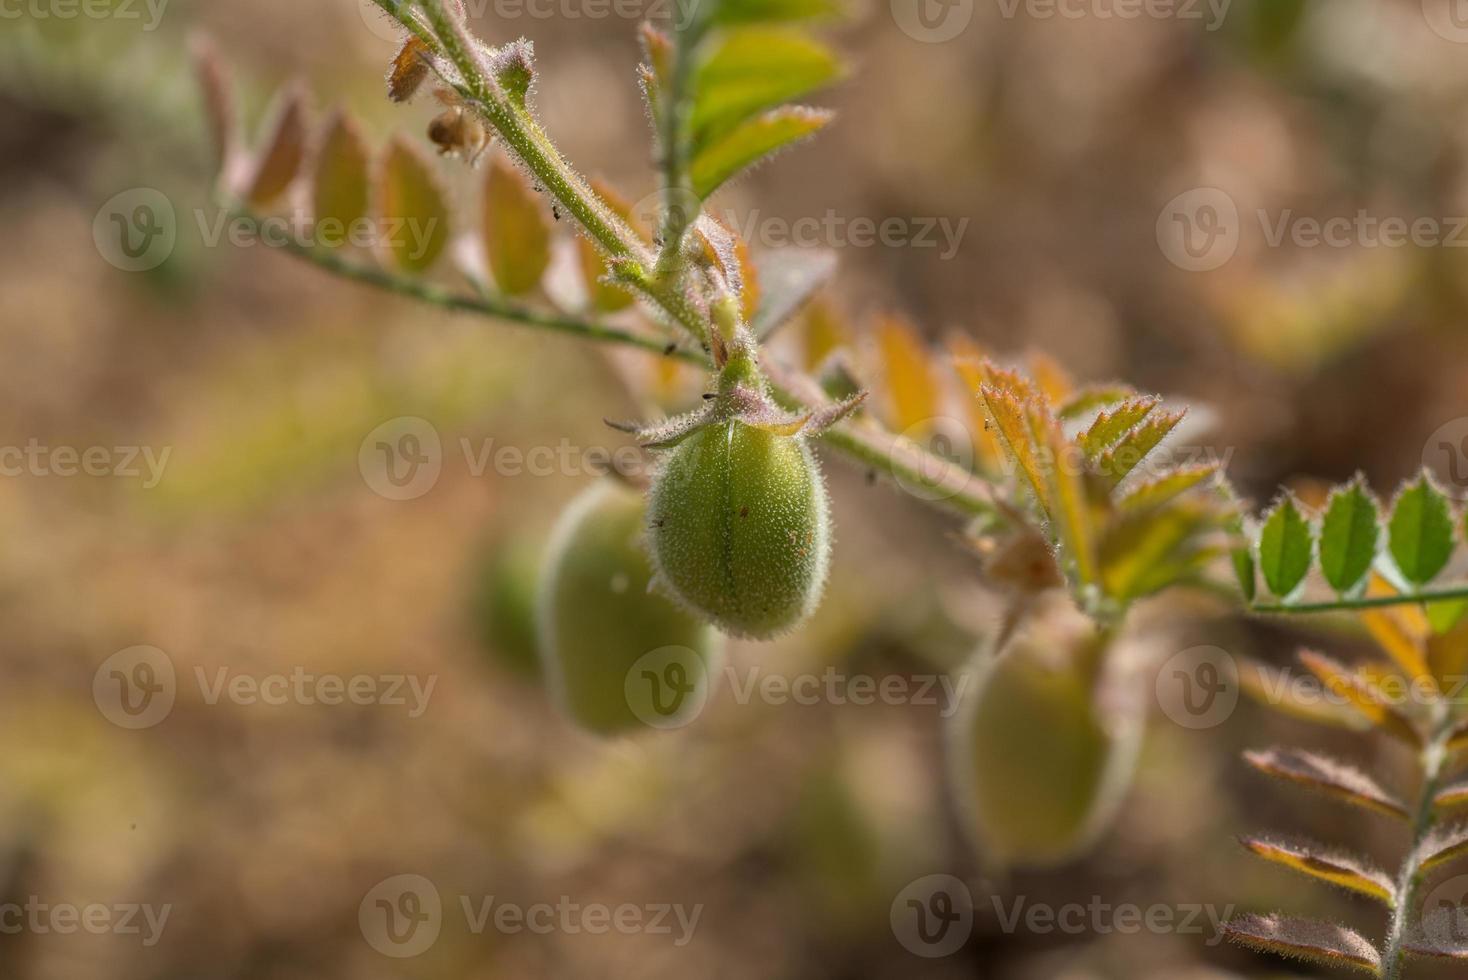 Chickpeas pod with green young plants in the farm field, Closeup. photo